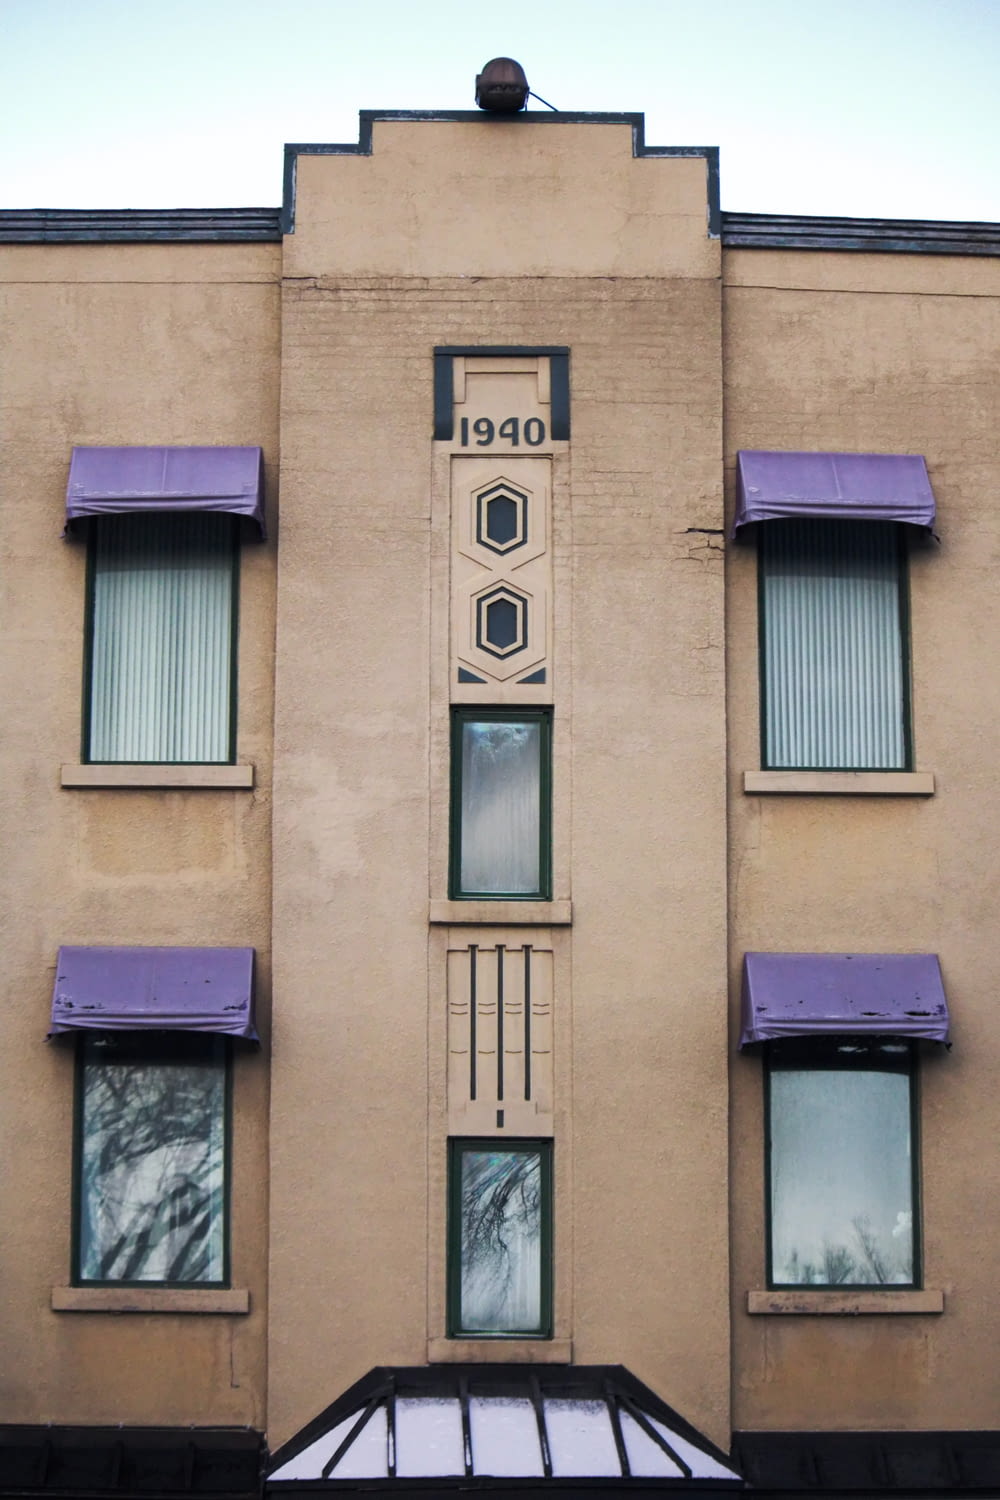 a tall building with purple awnings and windows